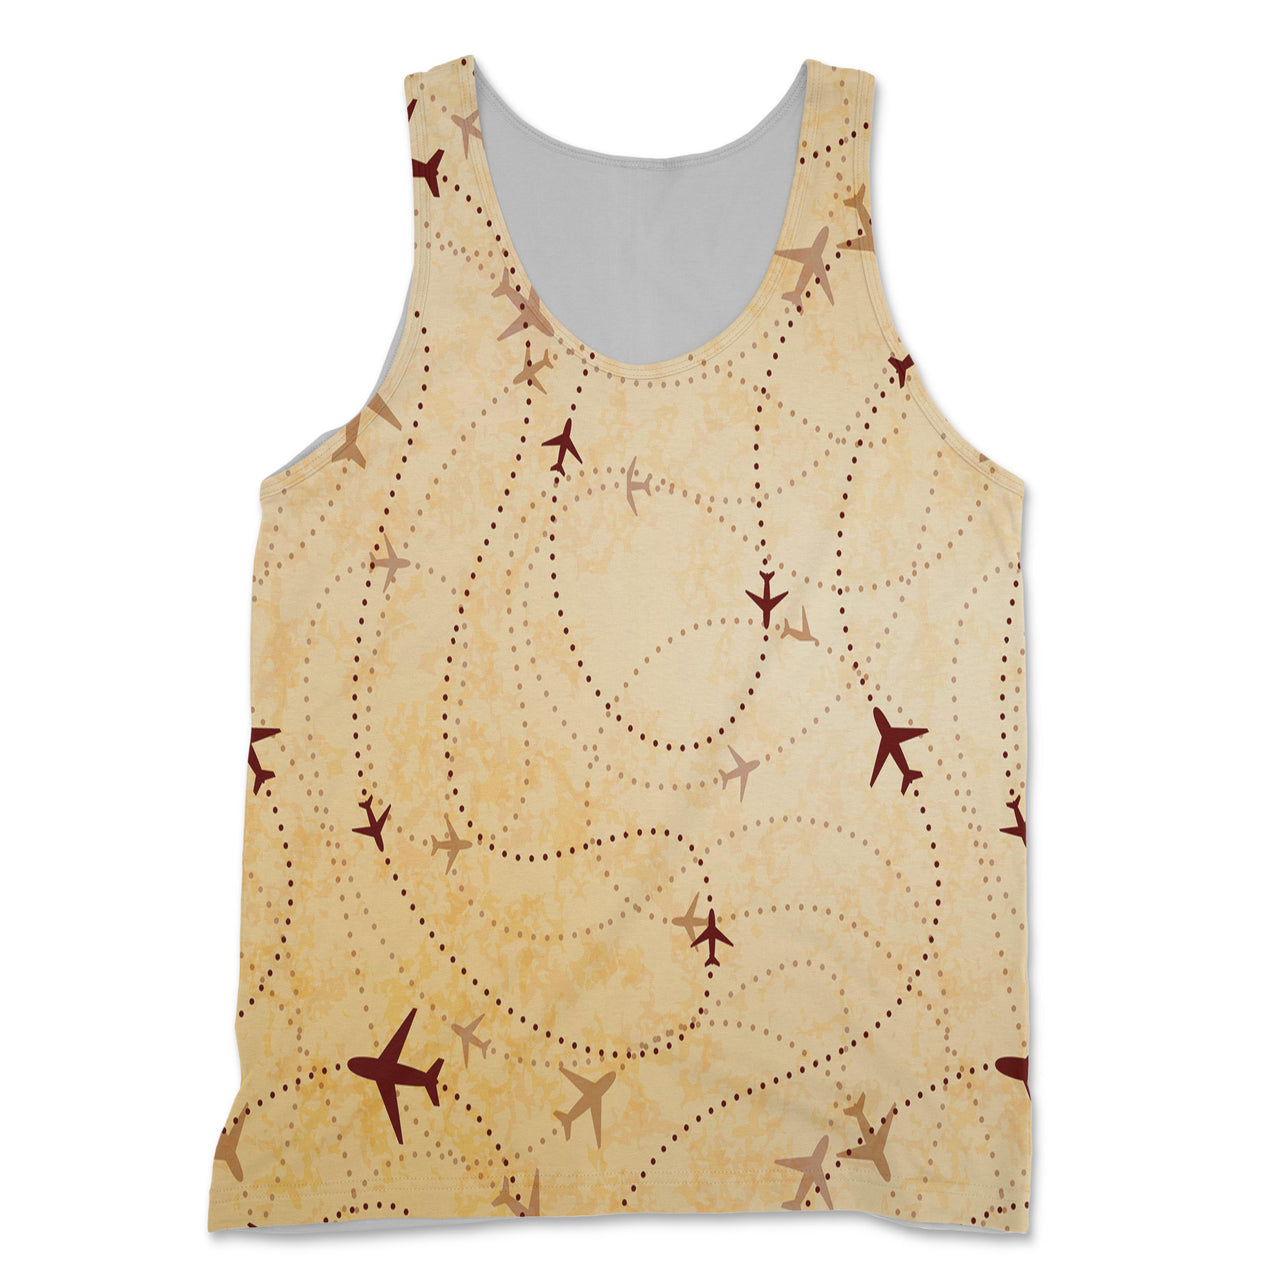 Vintage Travelling with Aircraft Designed 3D Tank Tops